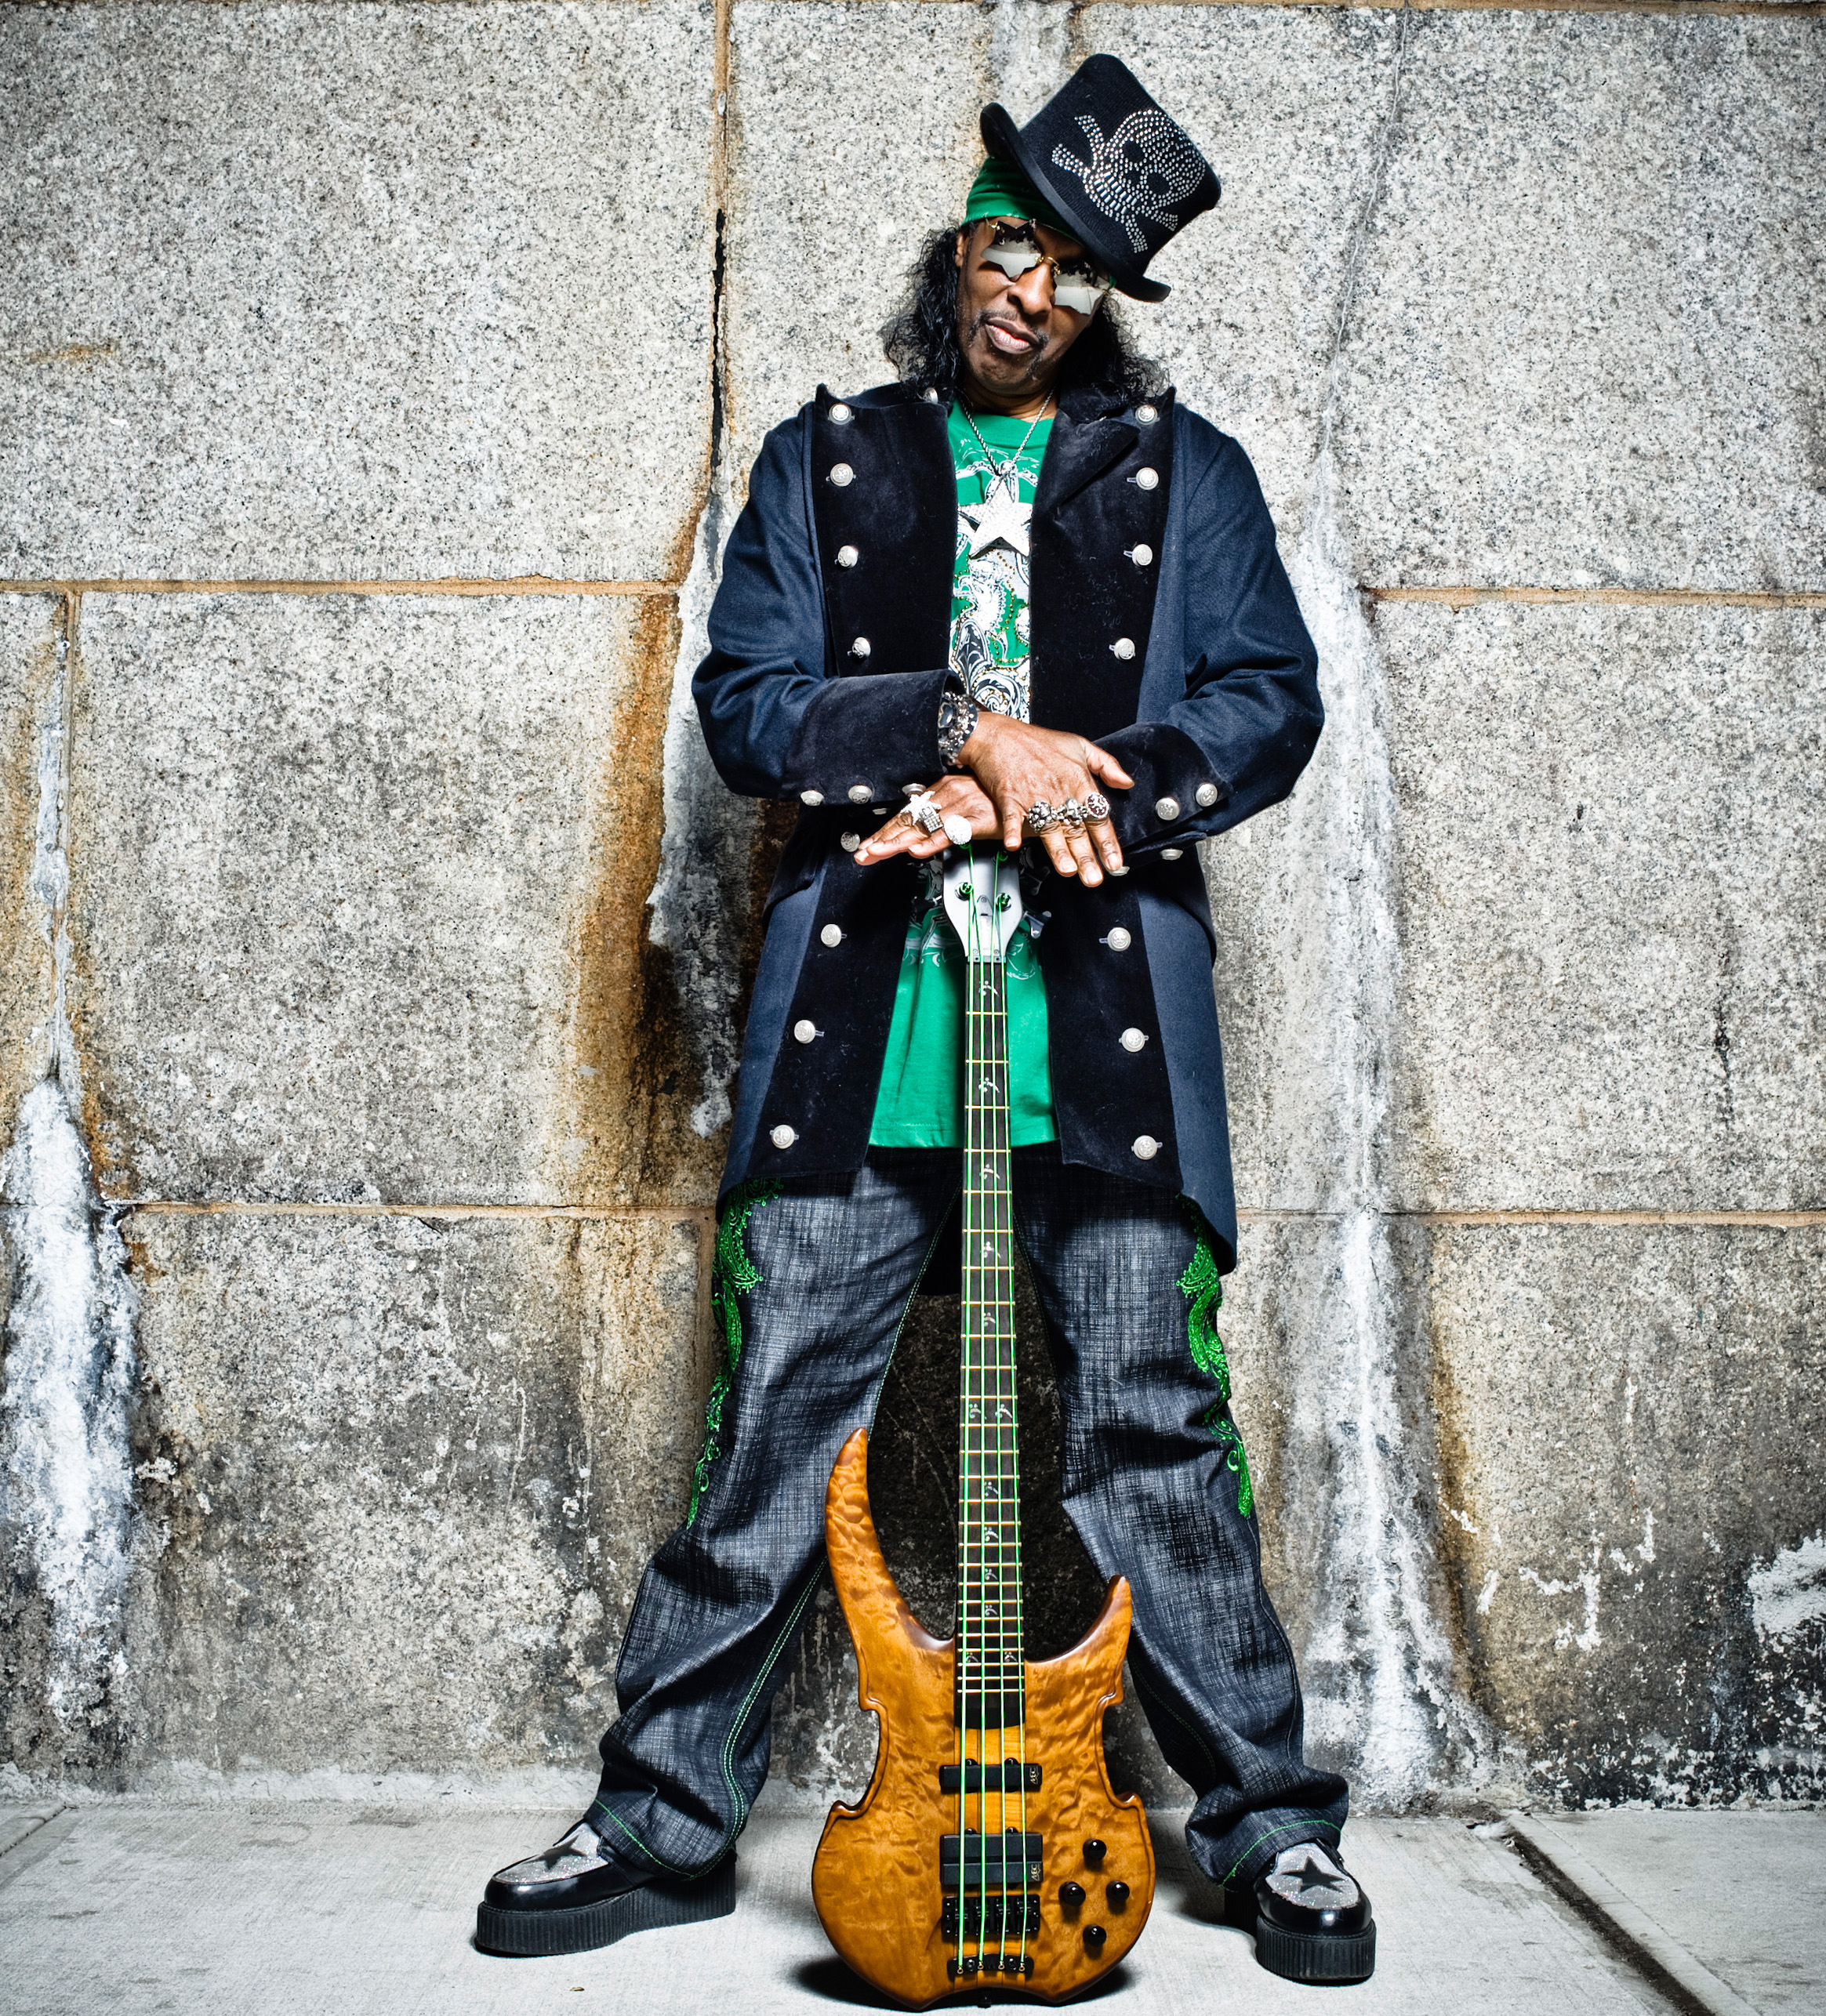 Bootsy collins